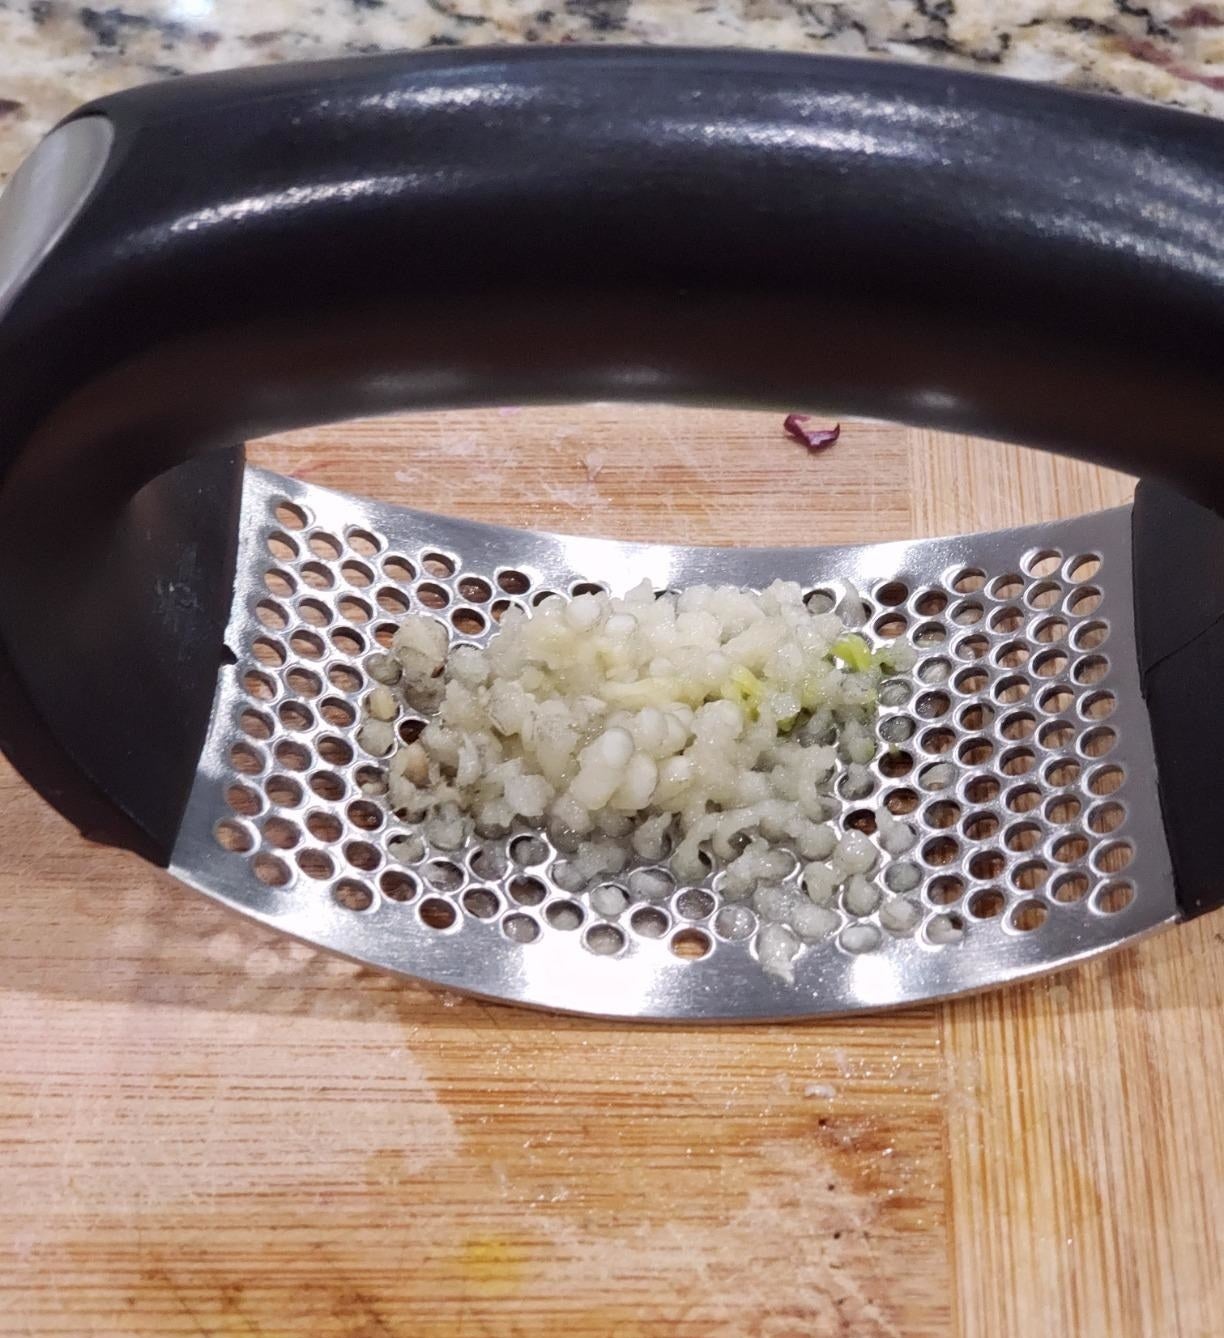 the rolling handheld garlic press with minced garlic in it